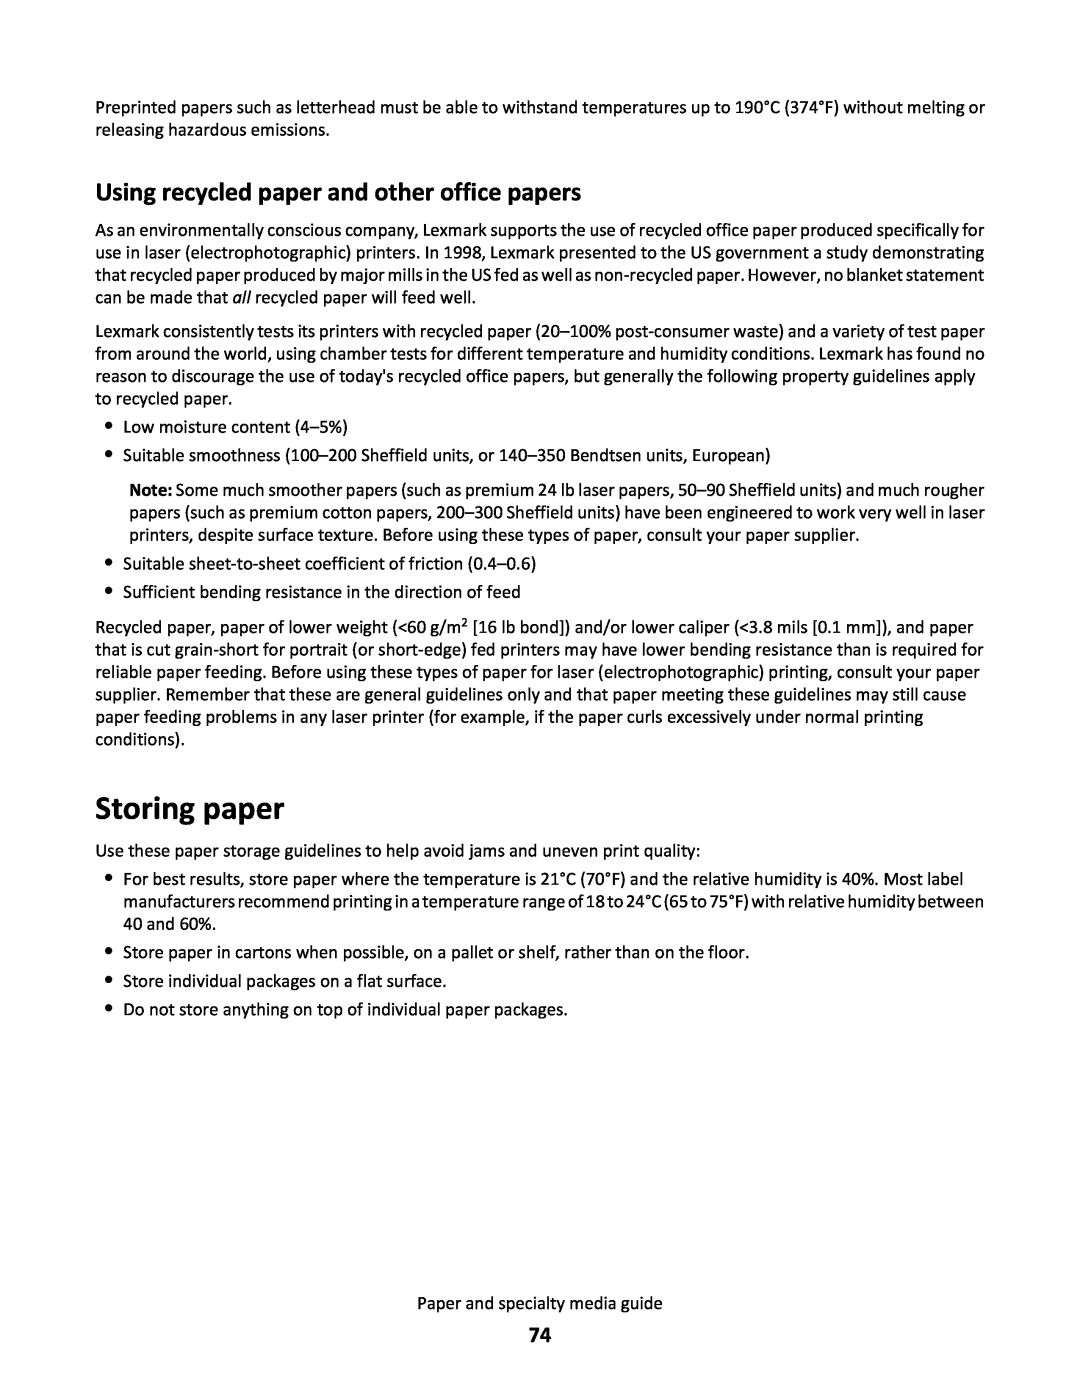 Lexmark C790 manual Storing paper, Using recycled paper and other office papers 